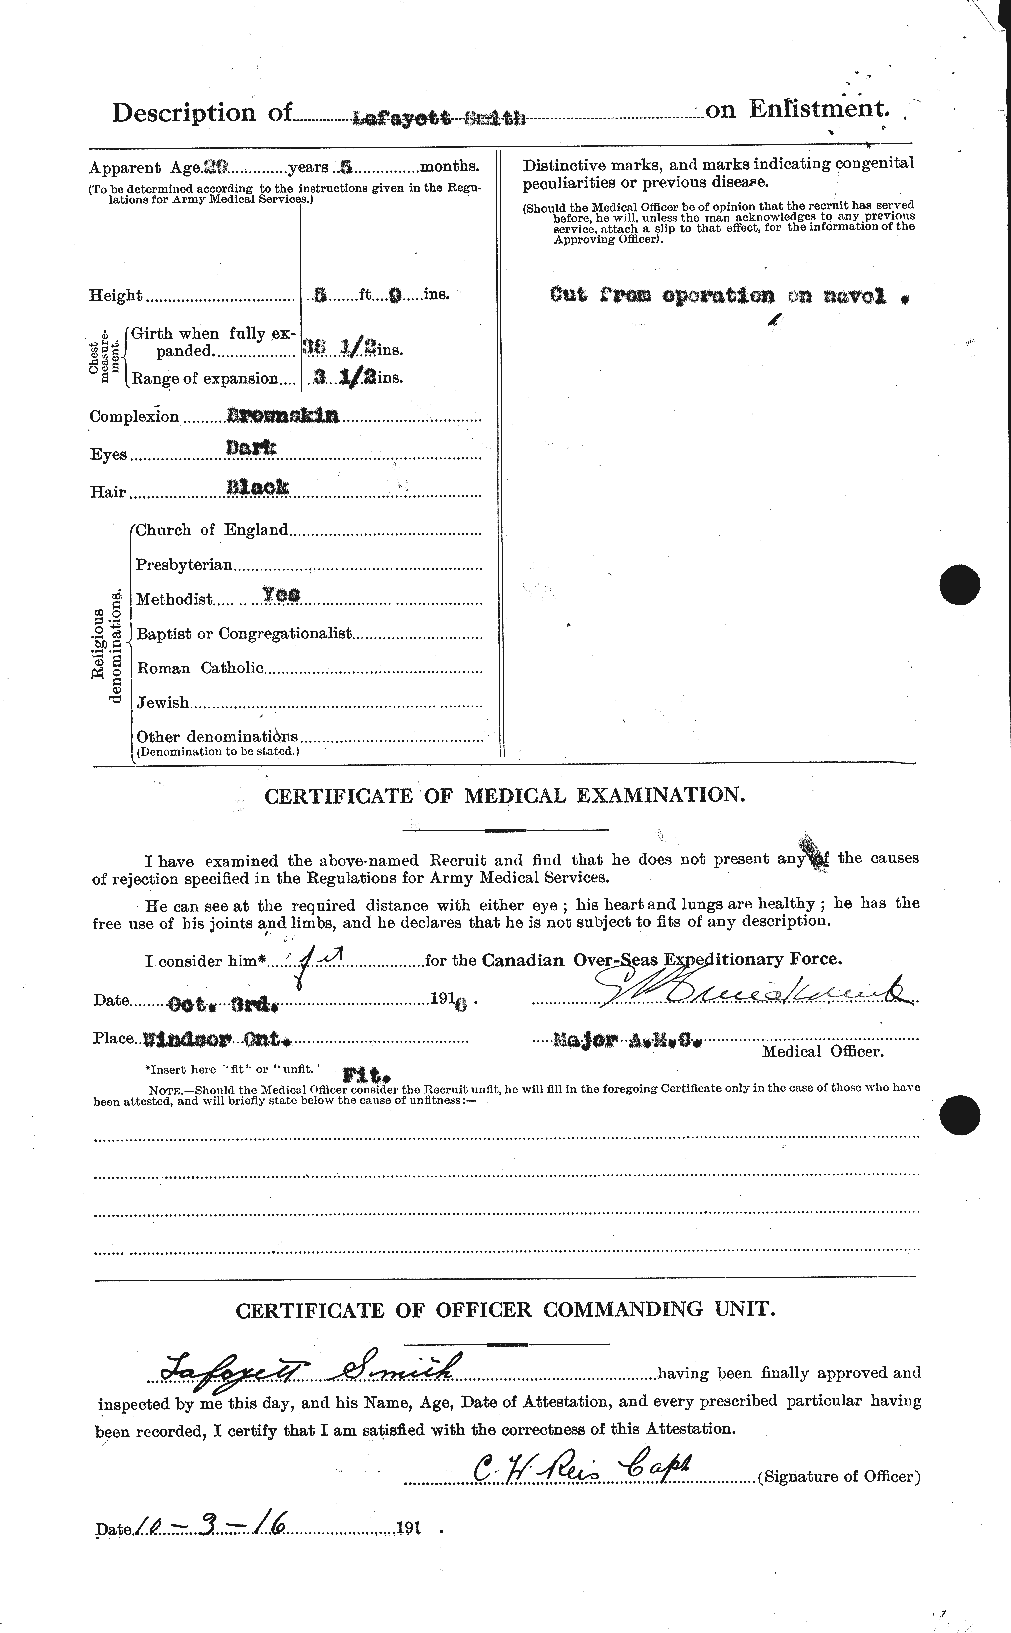 Personnel Records of the First World War - CEF 106508b